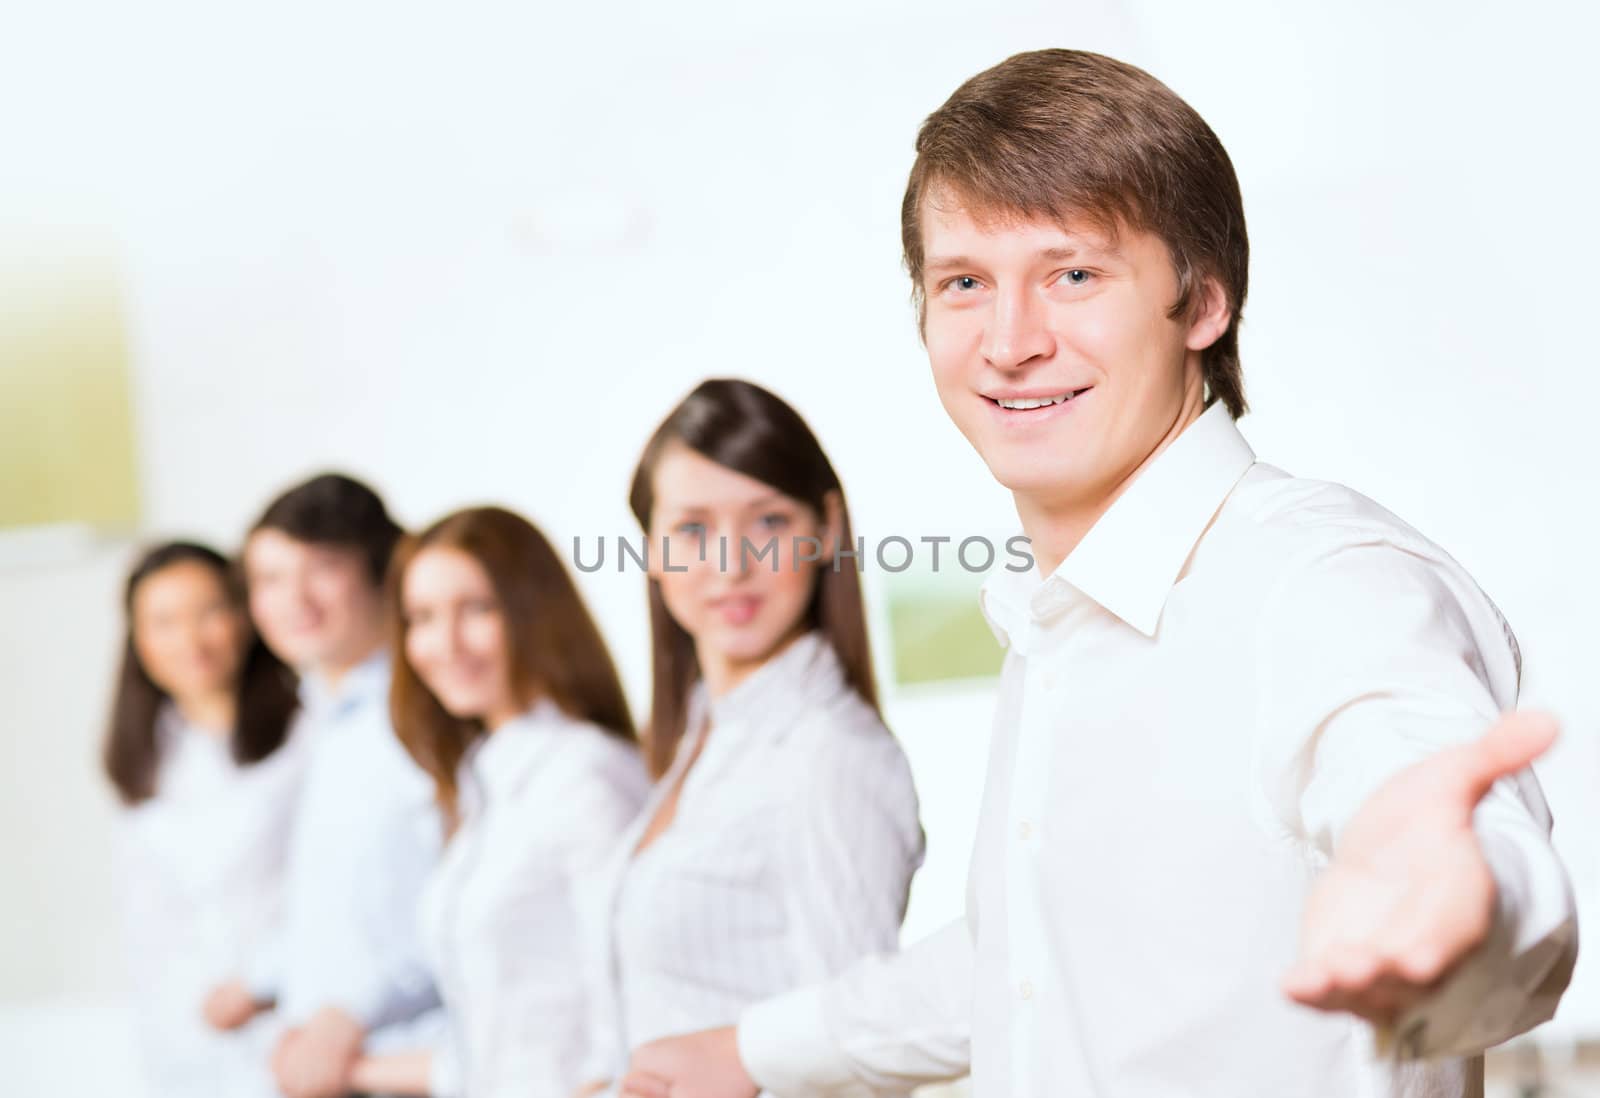 group of people holding hands, man holds out his hand, the concept of teamwork